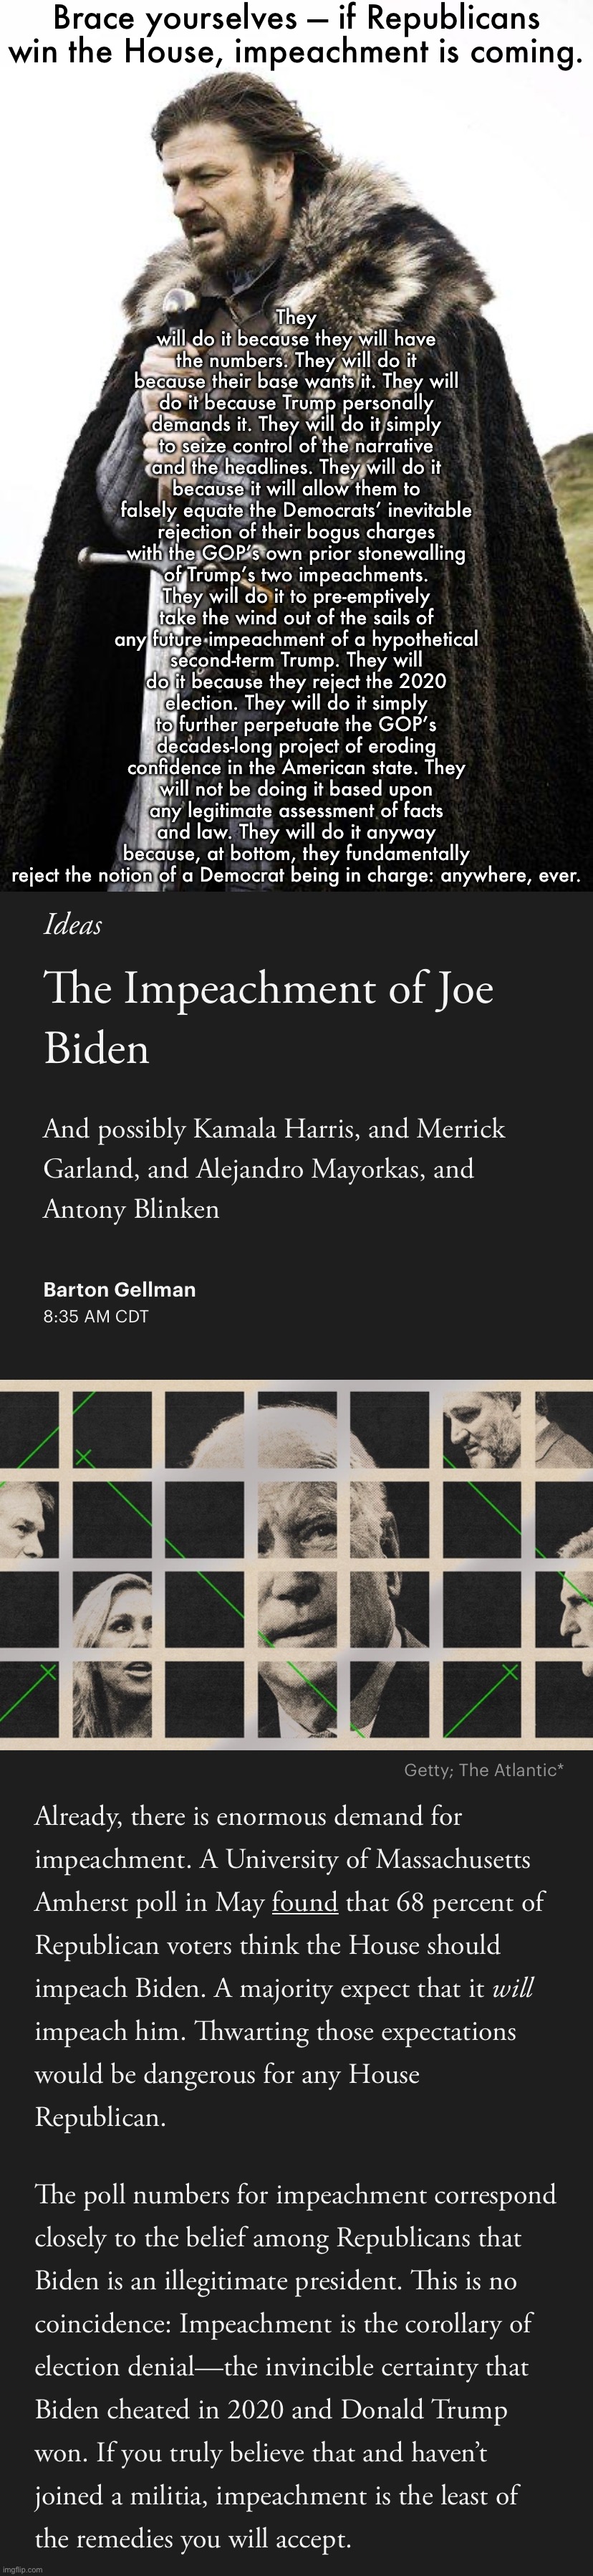 The inevitable impeachment of Biden: “sound and fury, signifying nothing.” | Brace yourselves — if Republicans win the House, impeachment is coming. They will do it because they will have the numbers. They will do it because their base wants it. They will do it because Trump personally demands it. They will do it simply to seize control of the narrative and the headlines. They will do it because it will allow them to falsely equate the Democrats’ inevitable rejection of their bogus charges with the GOP’s own prior stonewalling of Trump’s two impeachments. They will do it to pre-emptively take the wind out of the sails of any future impeachment of a hypothetical second-term Trump. They will do it because they reject the 2020 election. They will do it simply to further perpetuate the GOP’s decades-long project of eroding confidence in the American state. They will not be doing it based upon any legitimate assessment of facts and law. They will do it anyway because, at bottom, they fundamentally reject the notion of a Democrat being in charge: anywhere, ever. | image tagged in brace yourself,the impeachment of joe biden,biden,joe biden,republicans,gop | made w/ Imgflip meme maker